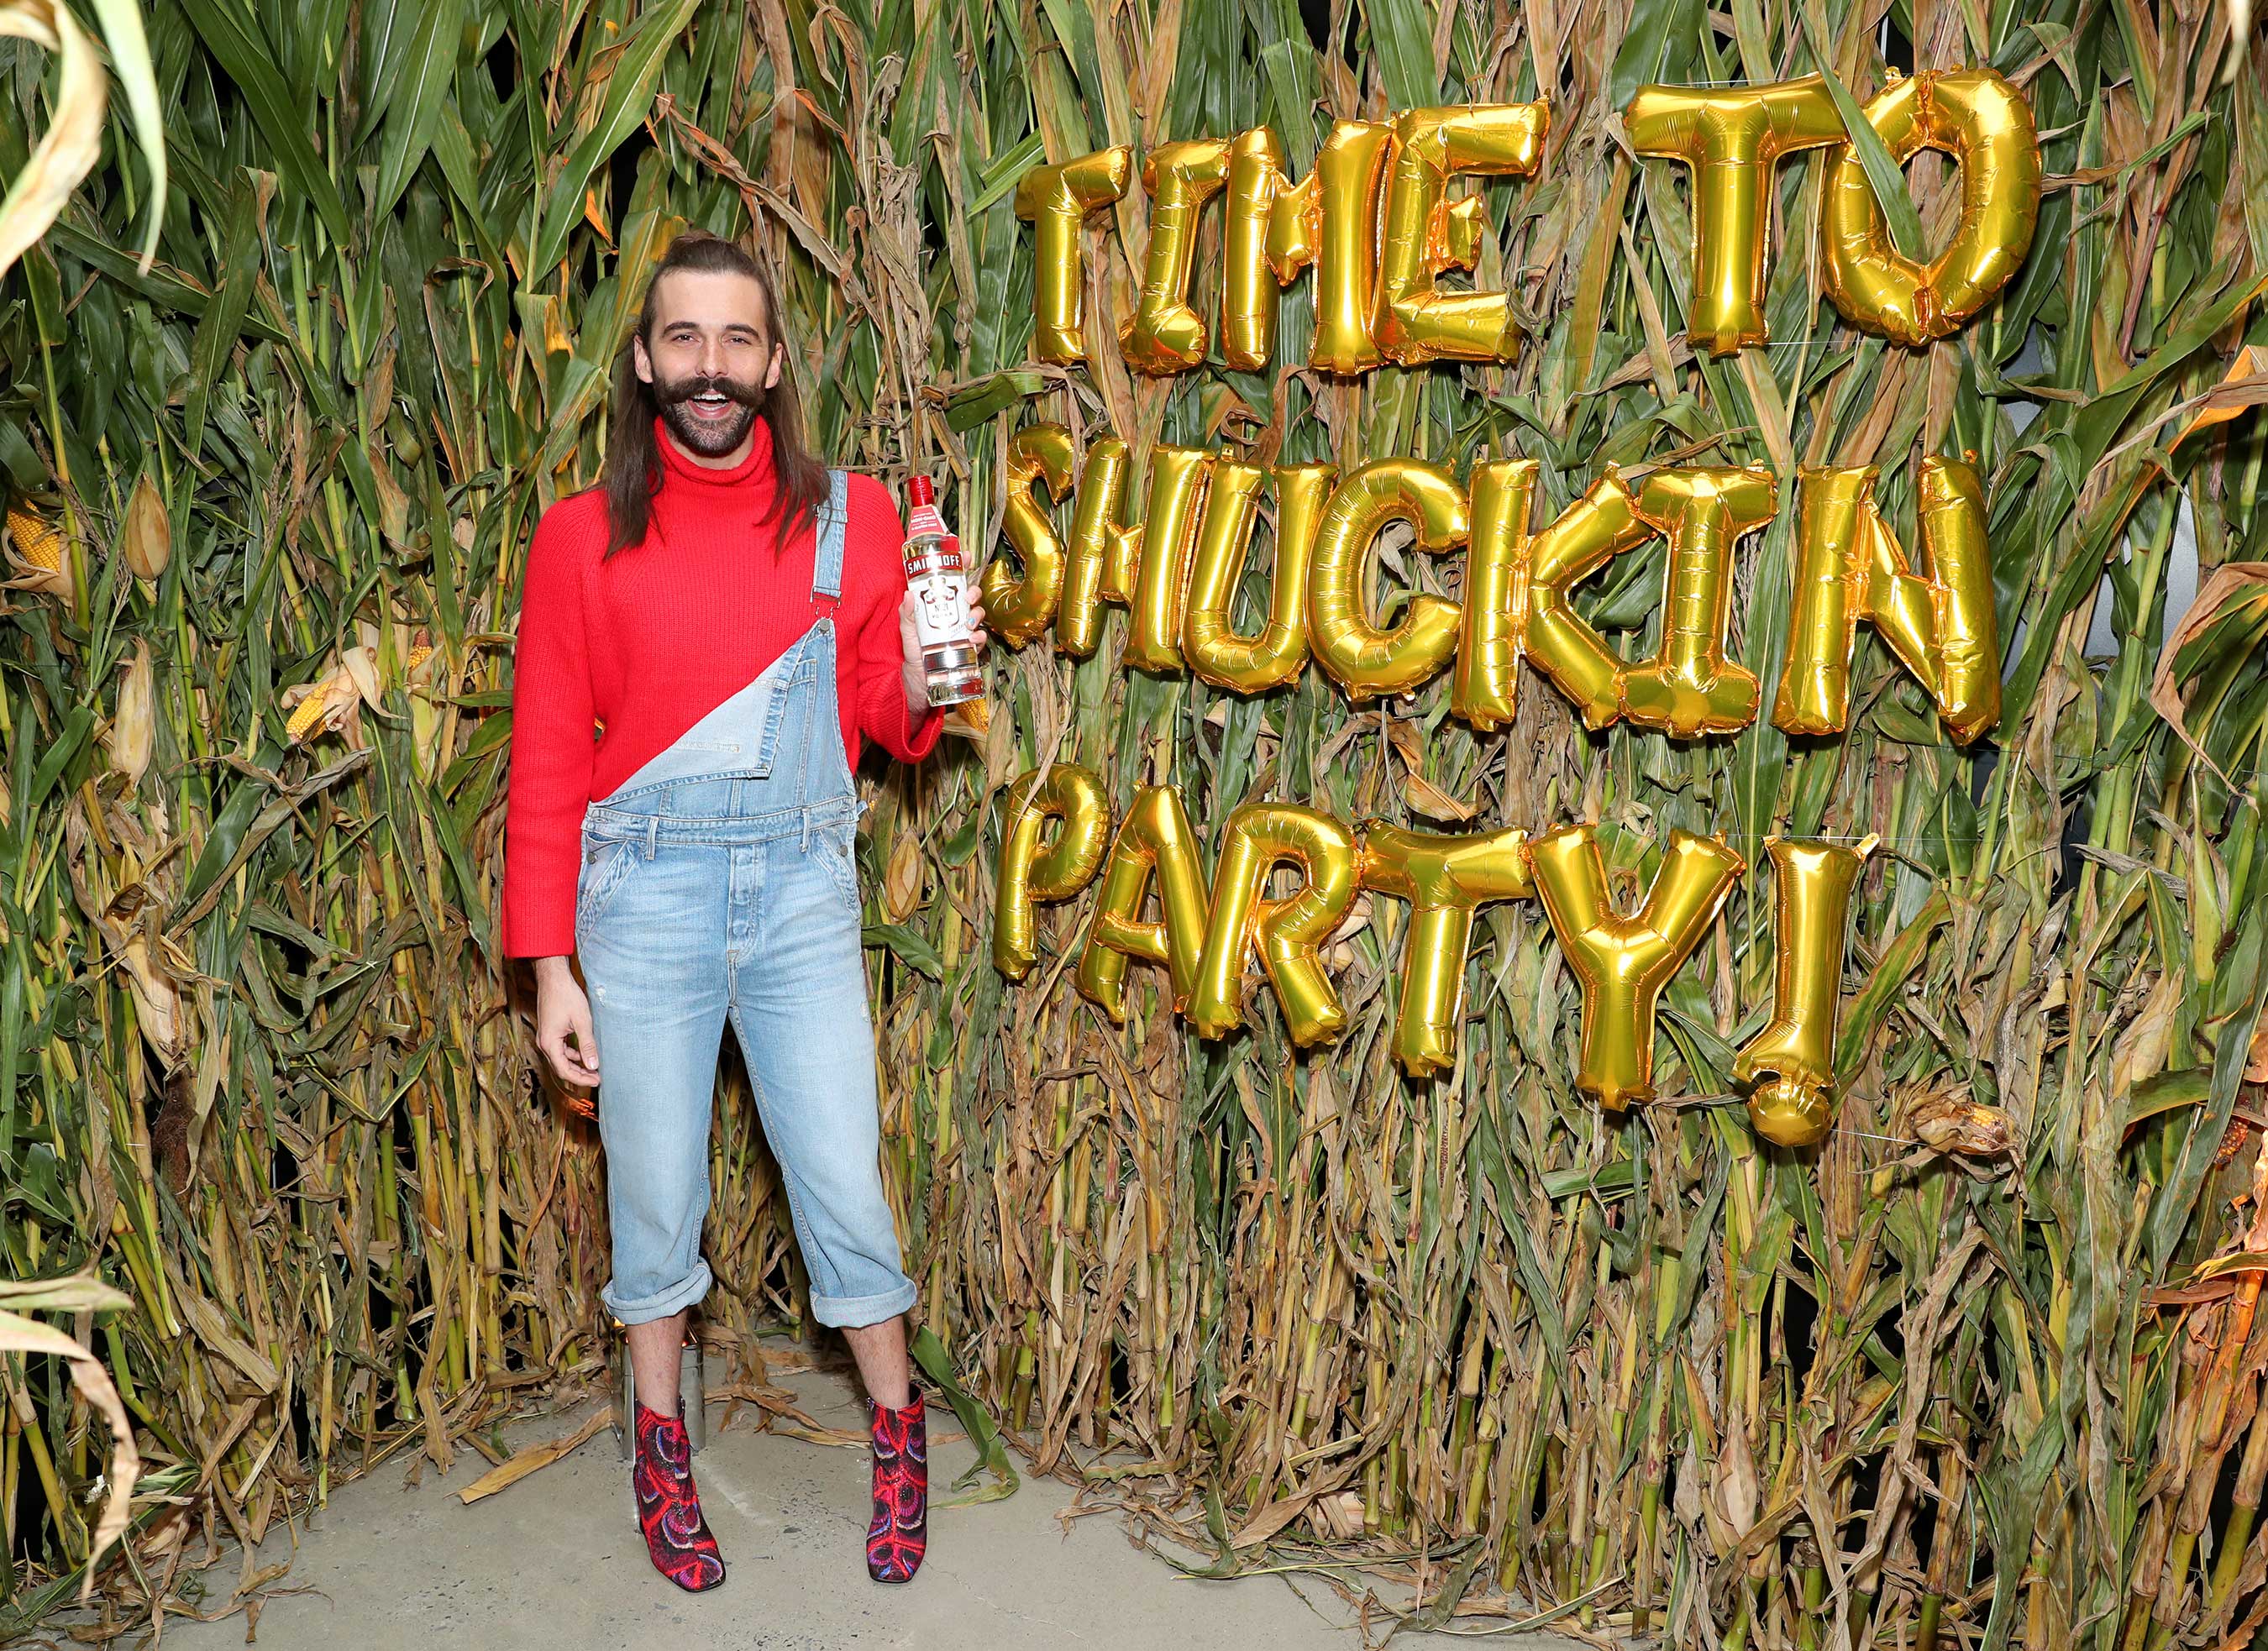 OMG! Jonathan Van Ness celebrates Smirnoff No. 21 Vodka, now made with non-GMO corn. (Photo by Cindy Ord/Getty Images for Smirnoff)